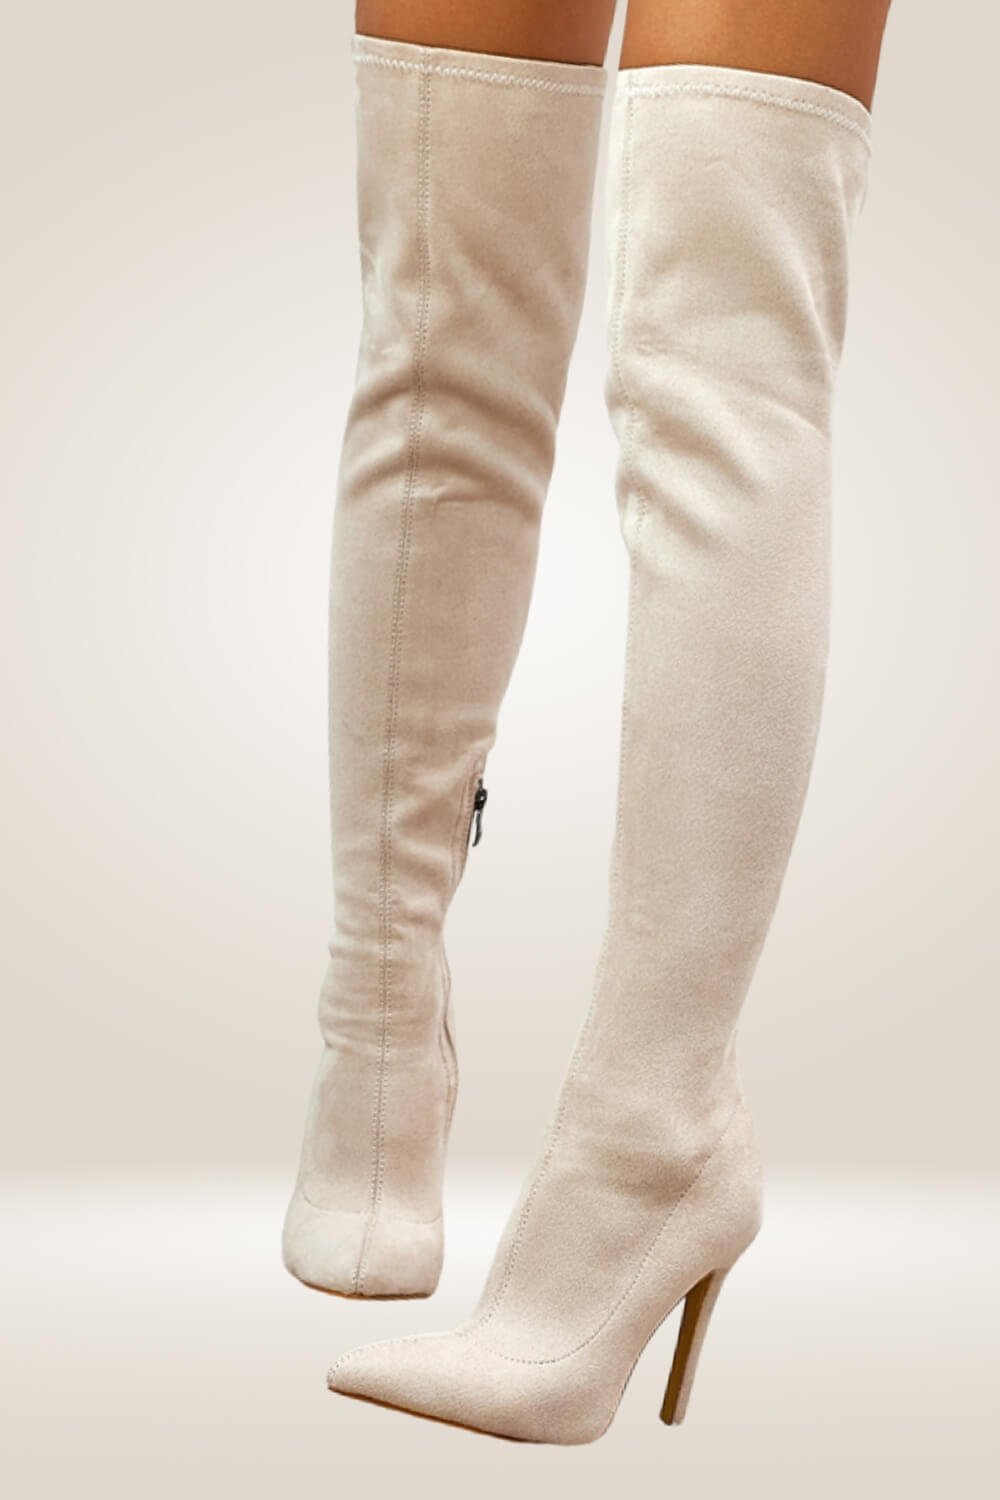 White Over The Knee High Heel Boots - TGC Boutique - Boots